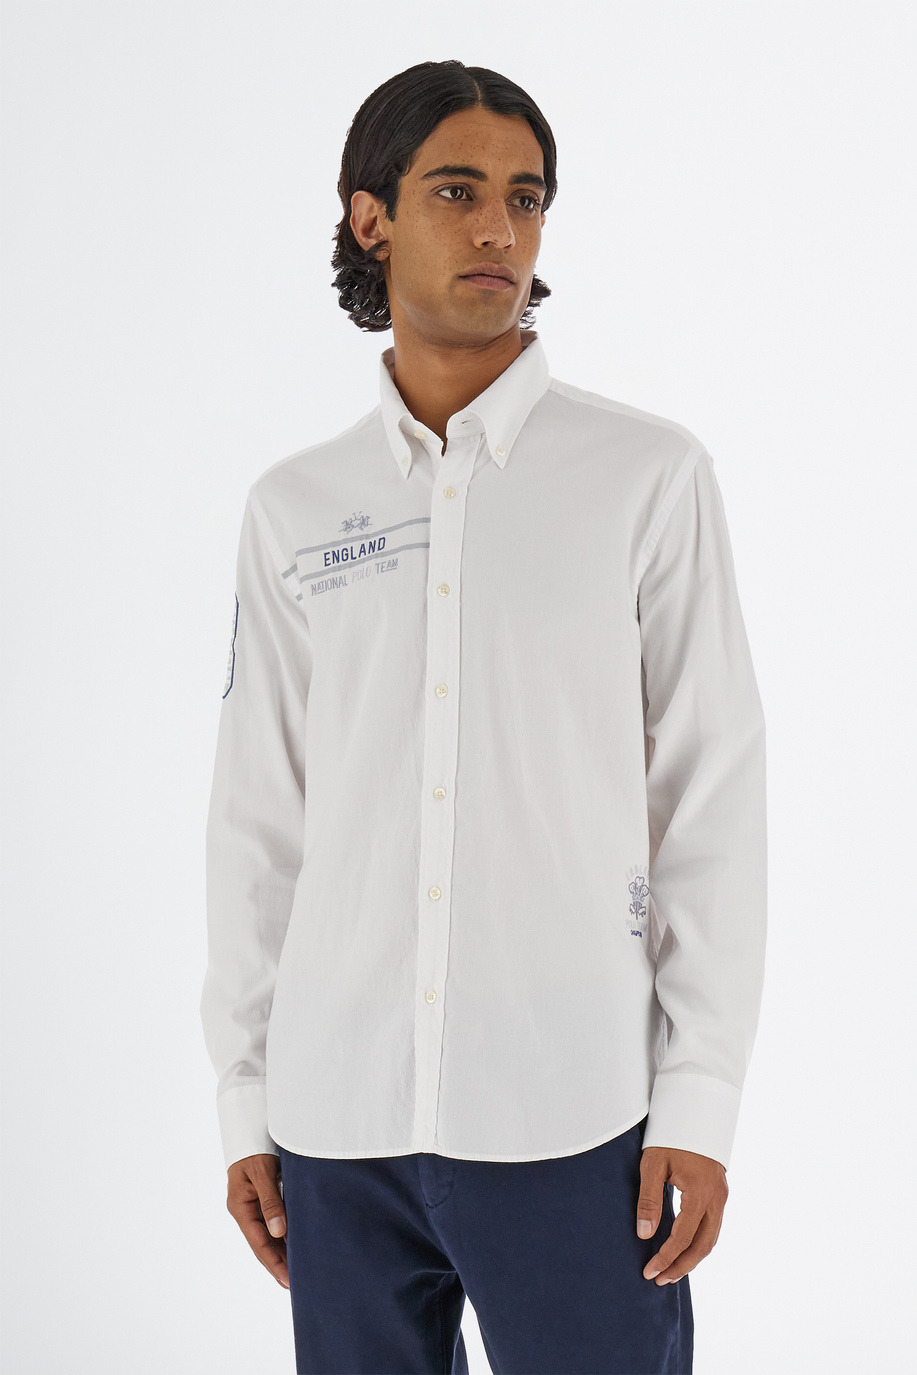 Men’s Inmortales shirt with long sleeves regular fit oxford fabric - Shirts | La Martina - Official Online Shop